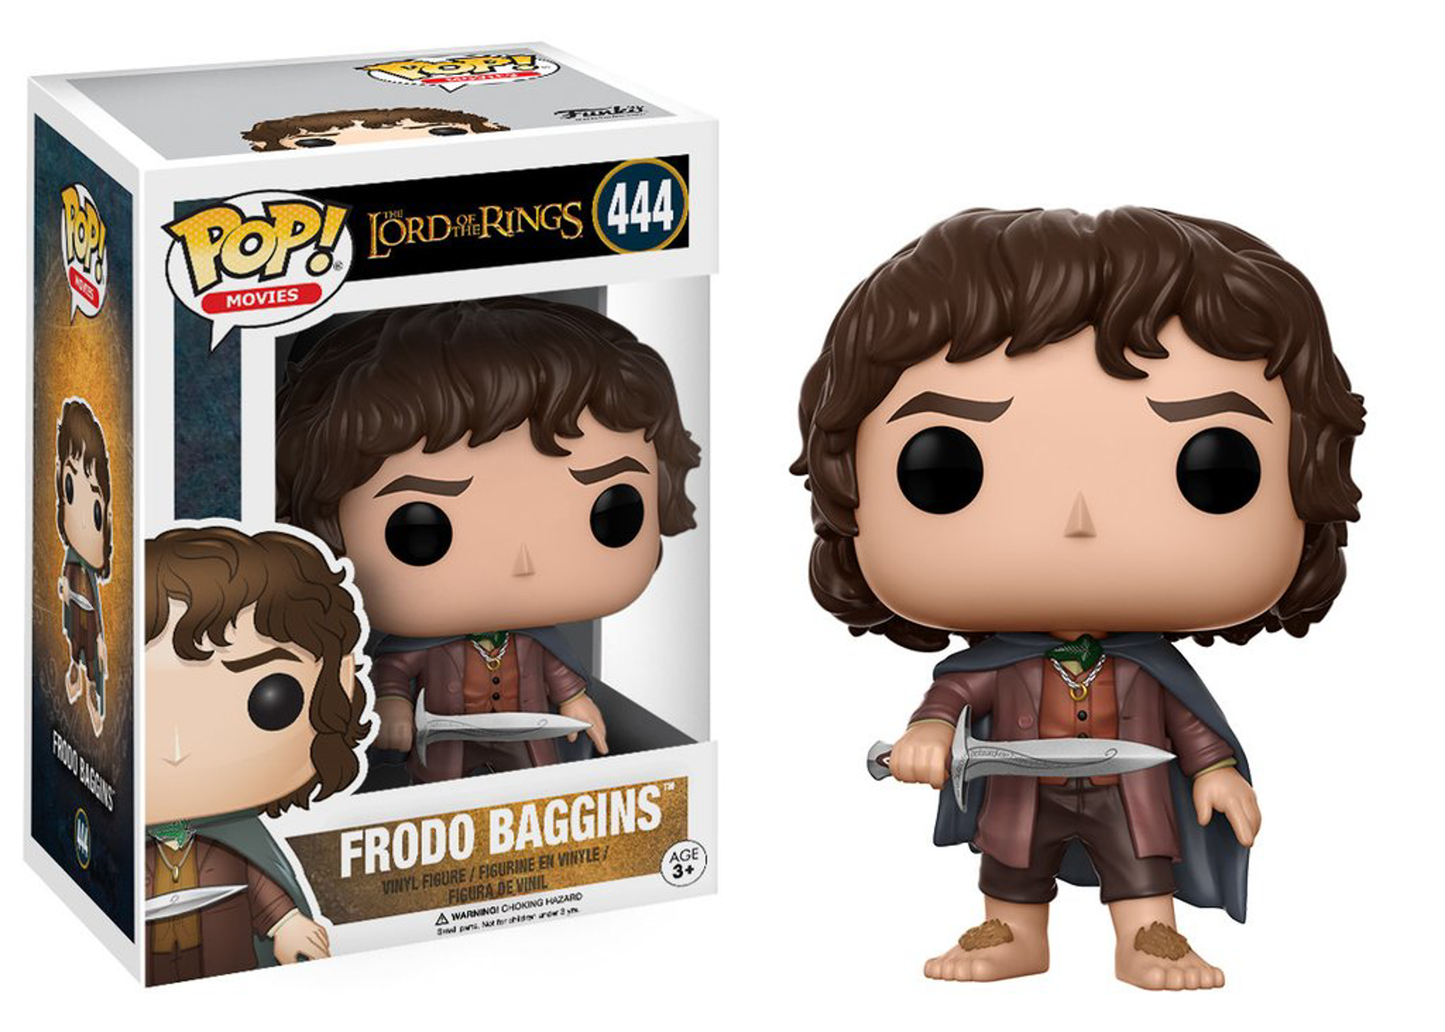 Funko Pop! Movies The Lord of the Rings Frodo Baggins